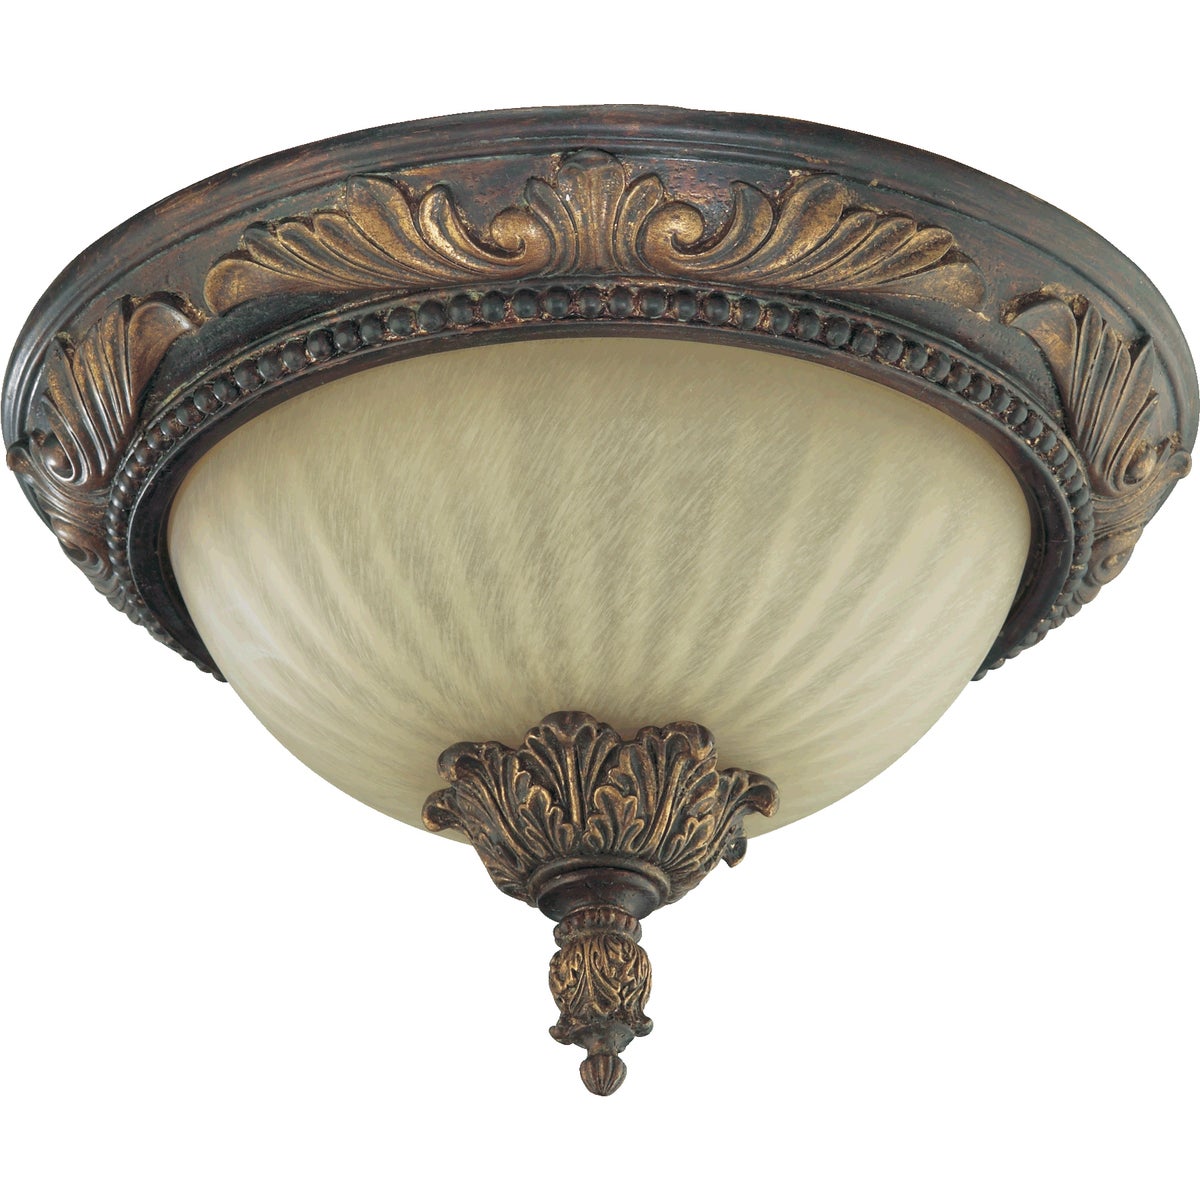 Traditional Flush Mount Light with corsican gold finish, showcasing ornate wood and bronze detailing. Cast structure, 2 bulbs, 60W, 120V. UL Listed, Damp Location. 13.5"W x 8.75"H.